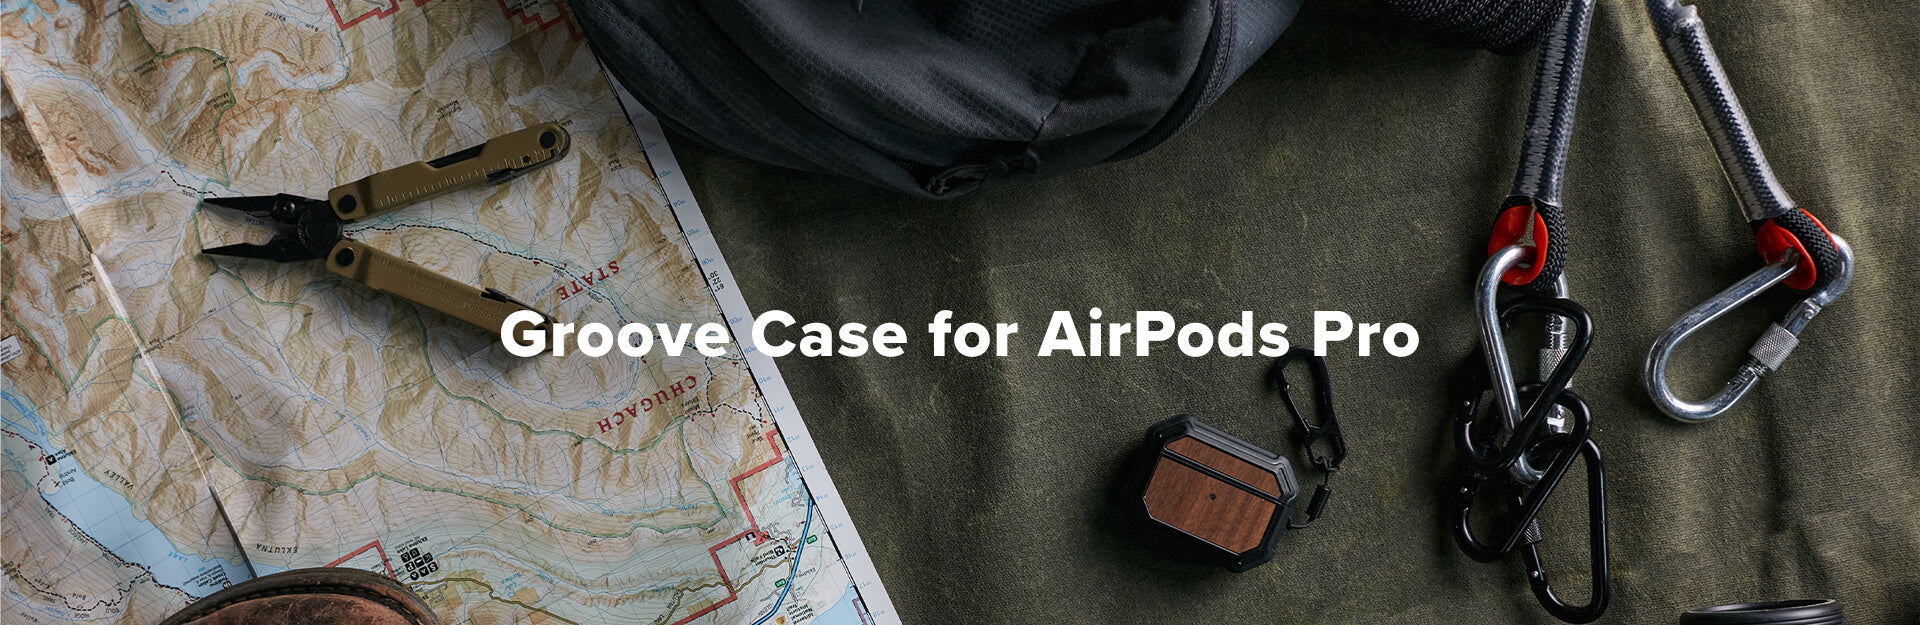 Groove Case for AirPods Pro